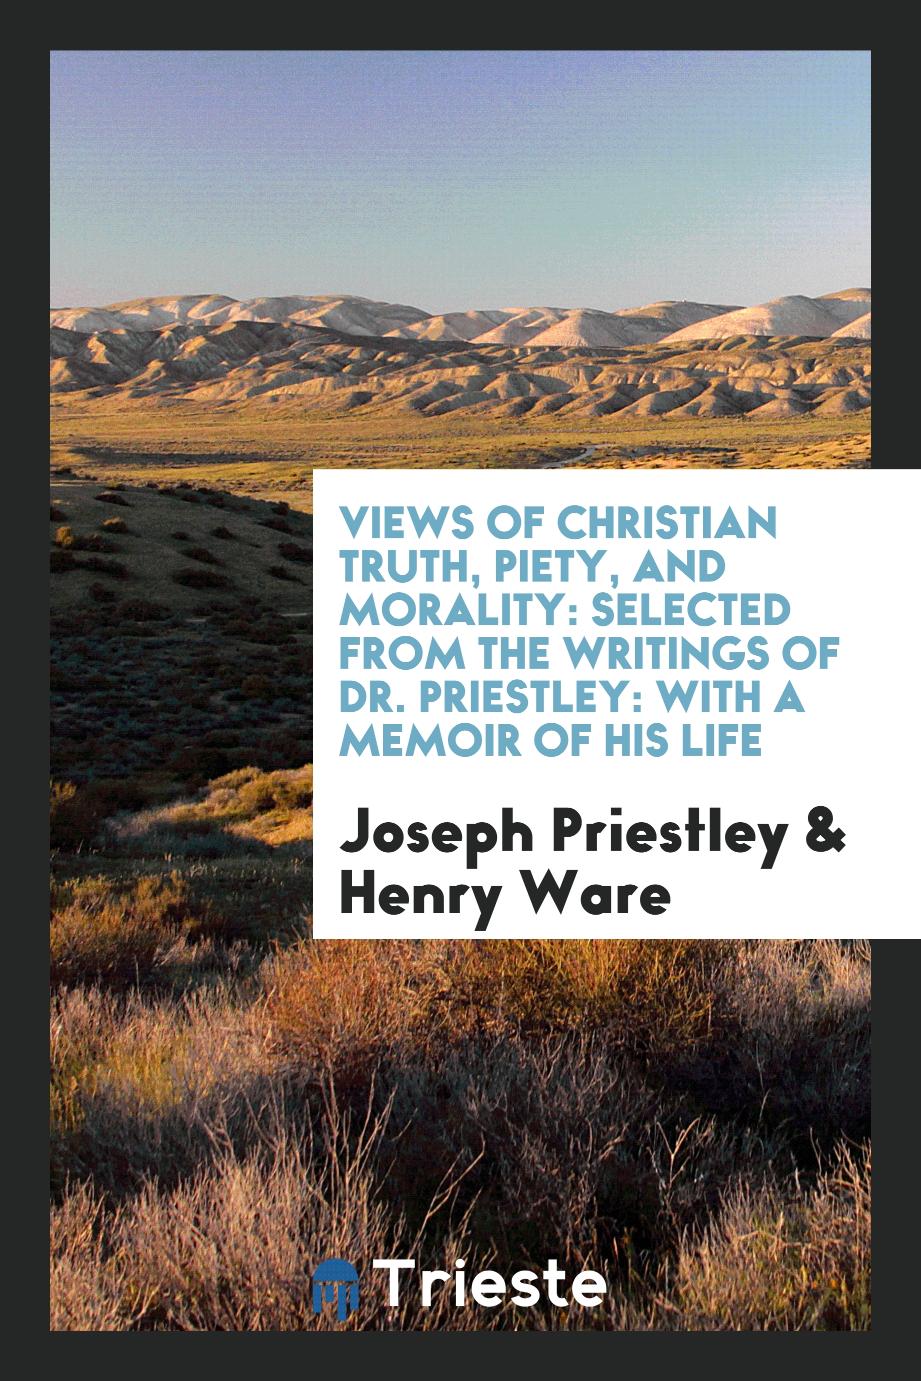 Views of Christian Truth, Piety, and Morality: Selected from the Writings of Dr. Priestley: With a Memoir of His Life